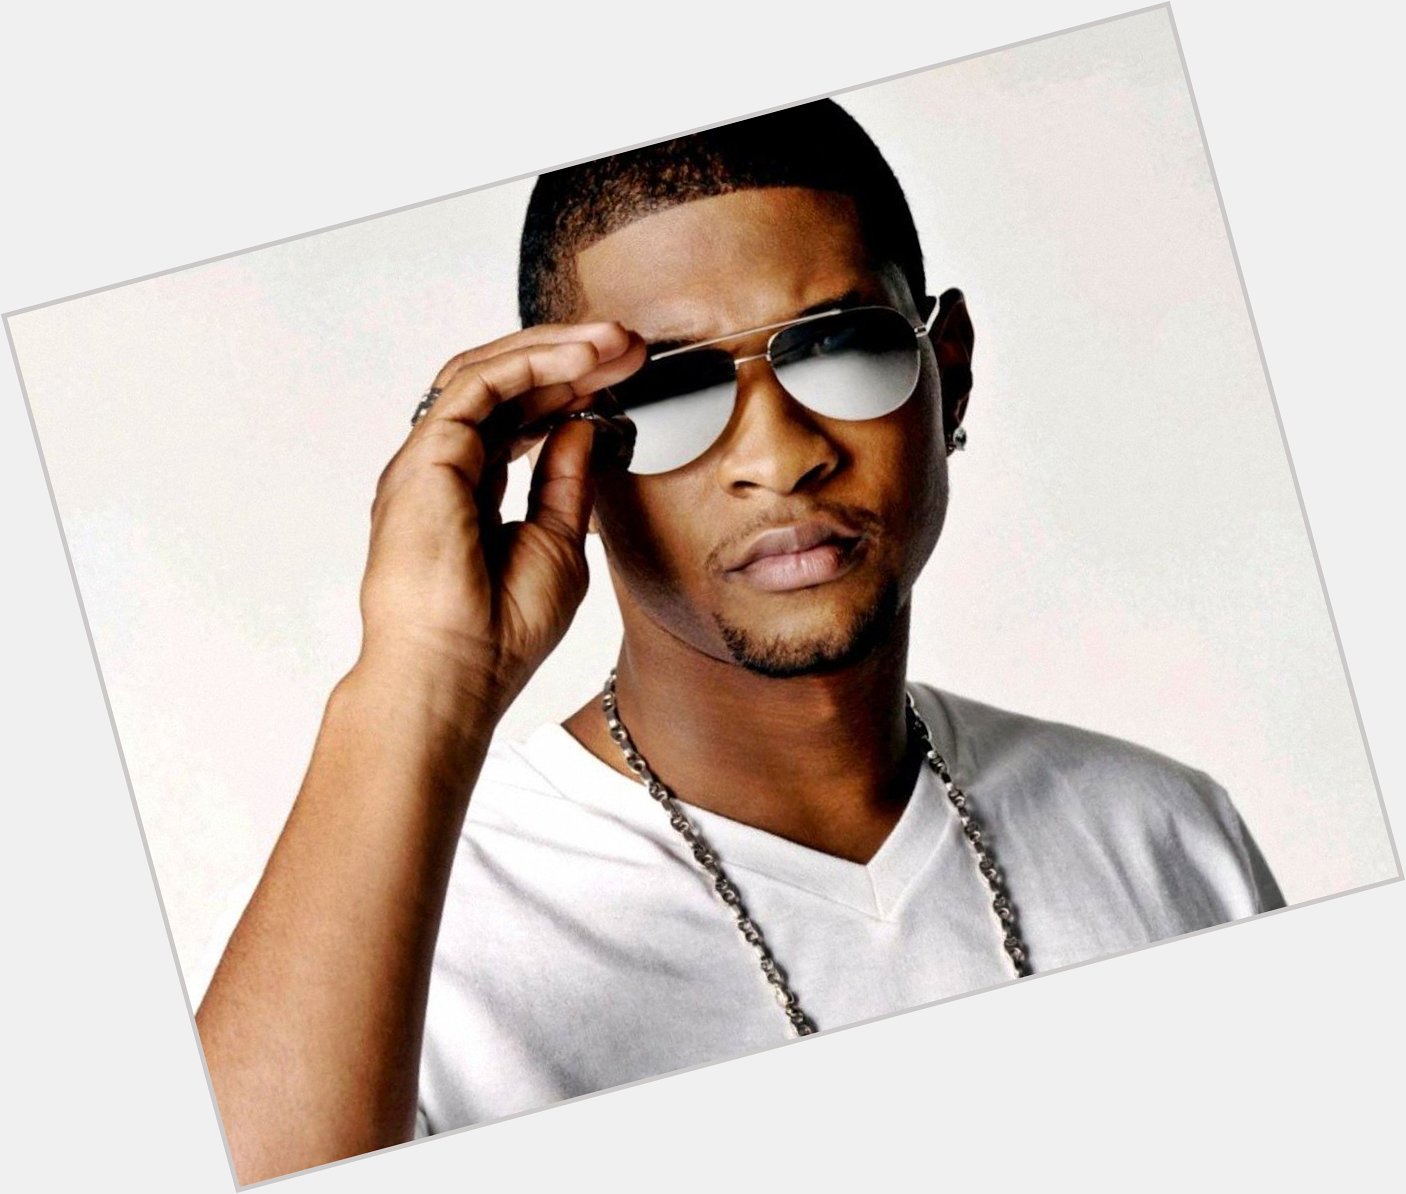 Happy 39th Birthday Shout Out to Usher born October 14, 1978 - Kick it.   